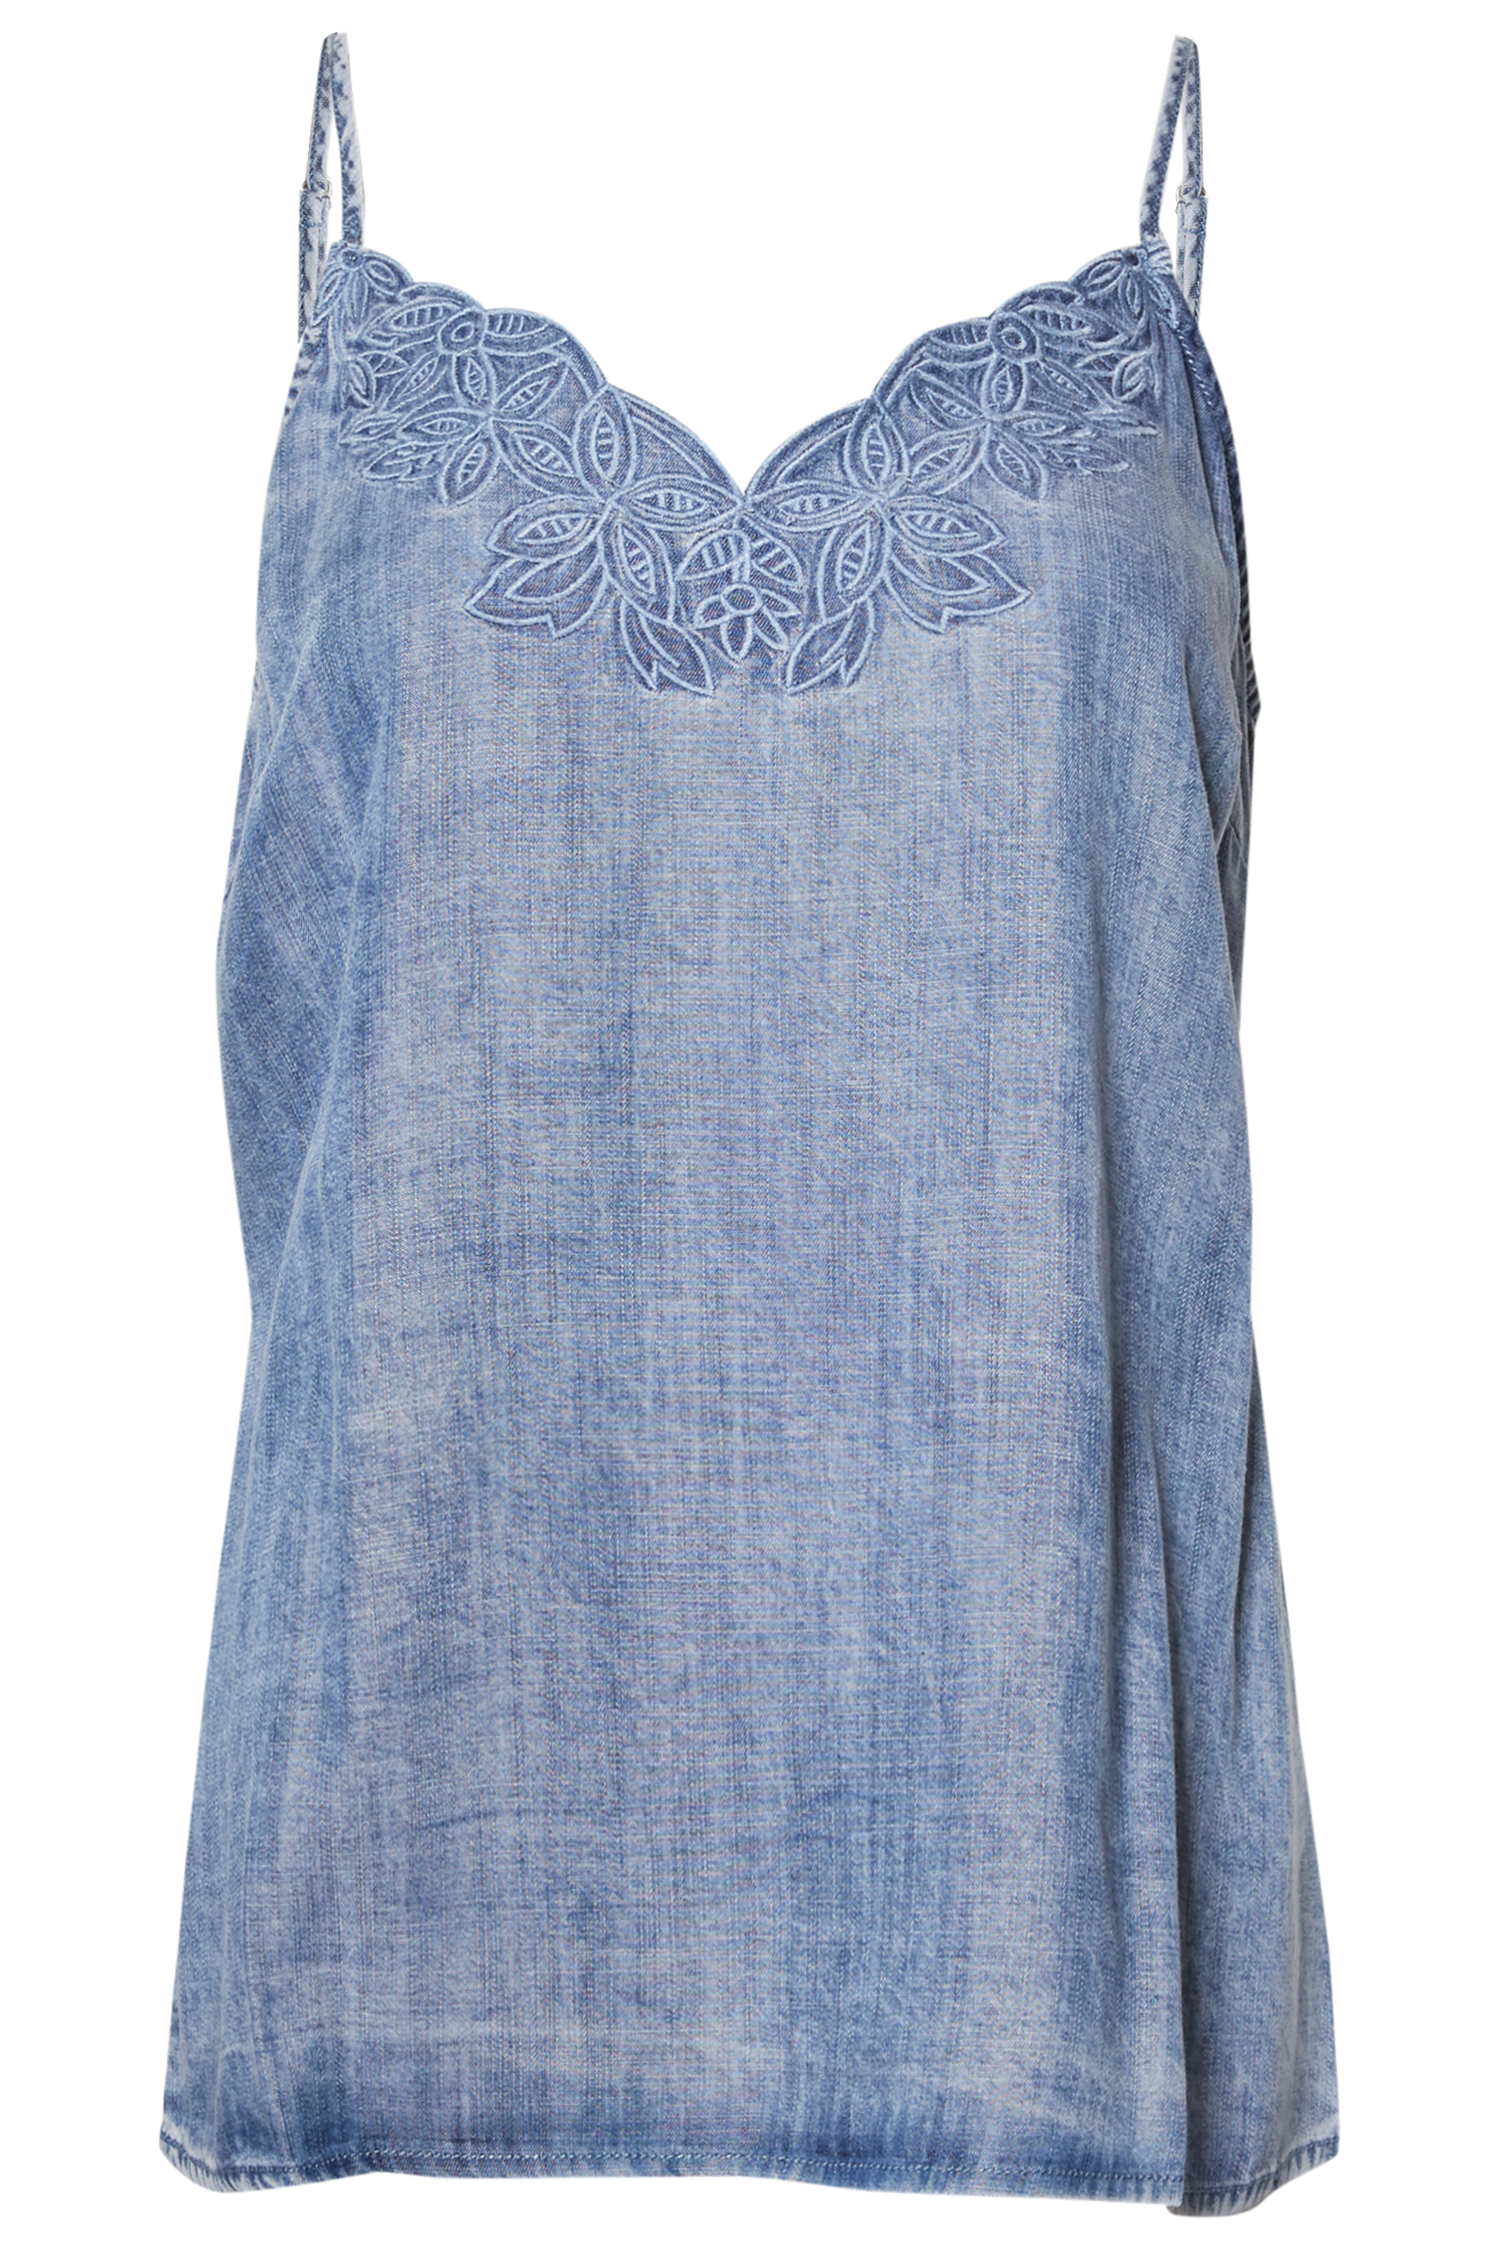 Skies are Blue Embroidered Cami in Light Blue S